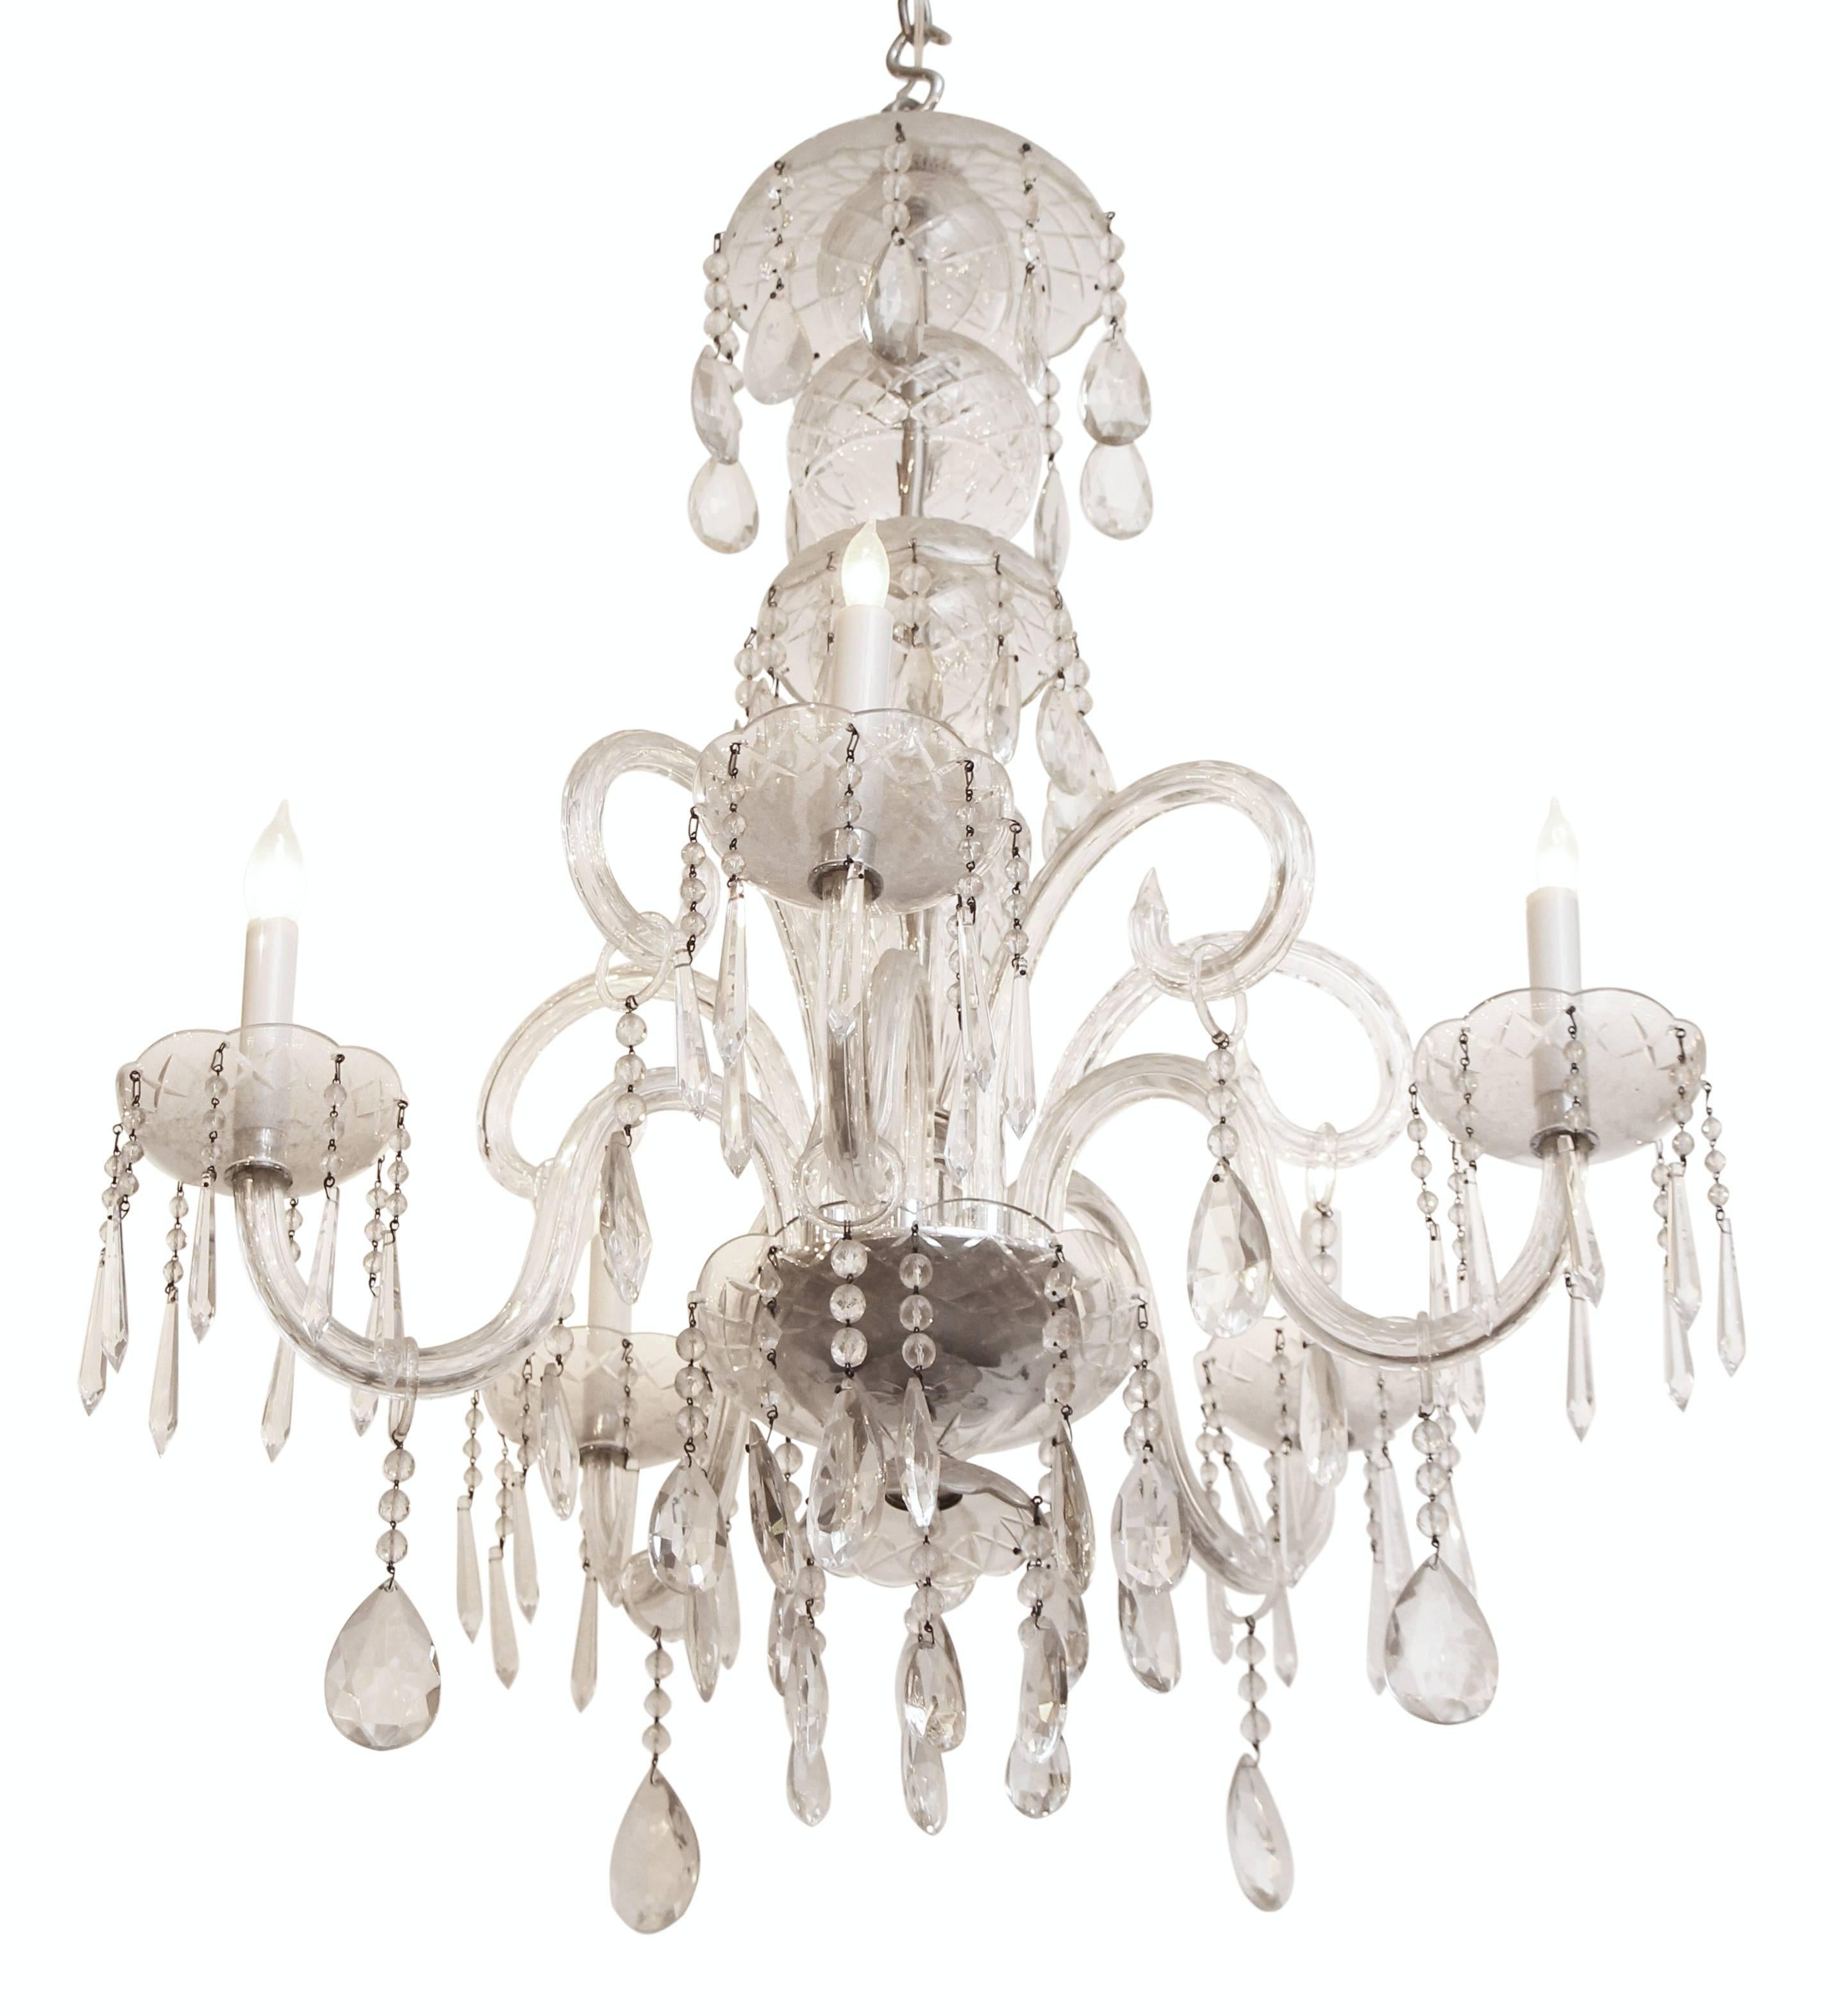 1940s Waterford Marie Therese style crystal chandelier with five lights. Made in Waterford, Ireland. Waterford crystal is renowned for it's brilliance due to the minerals in the sand used to make the crystal. This chandelier has been carefully